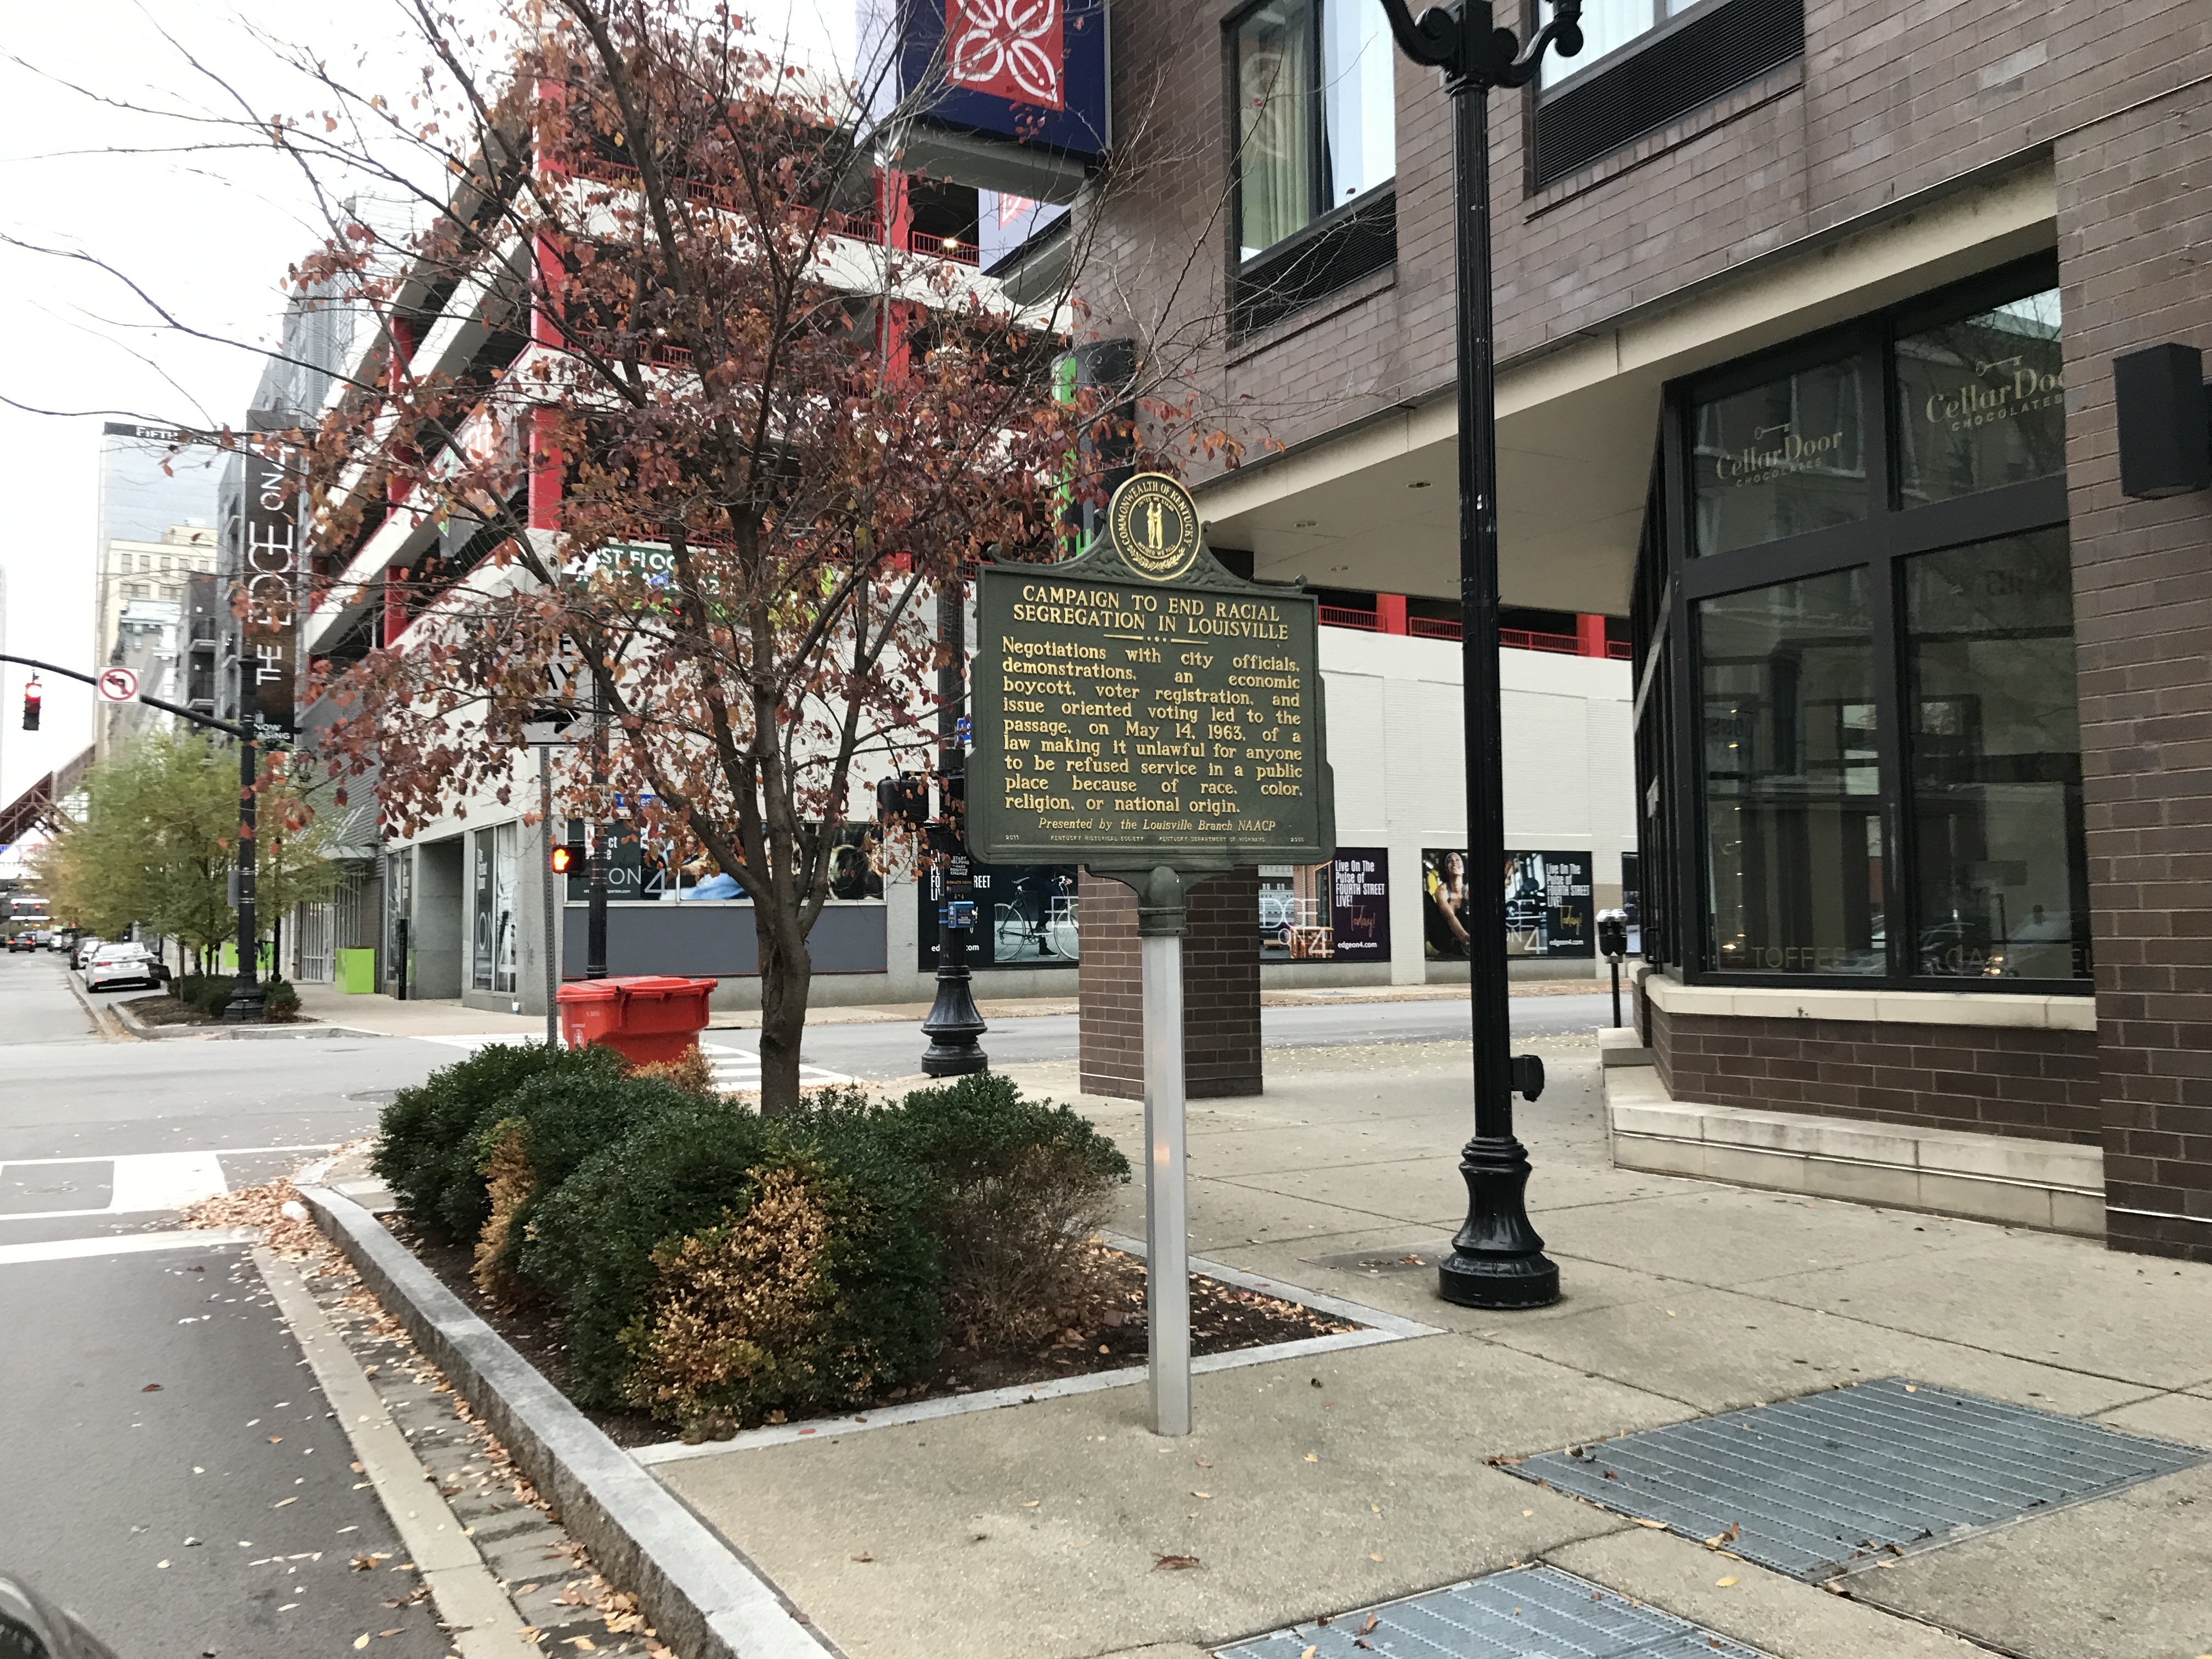 Campaign to End Racial Segregation in Louisville Marker